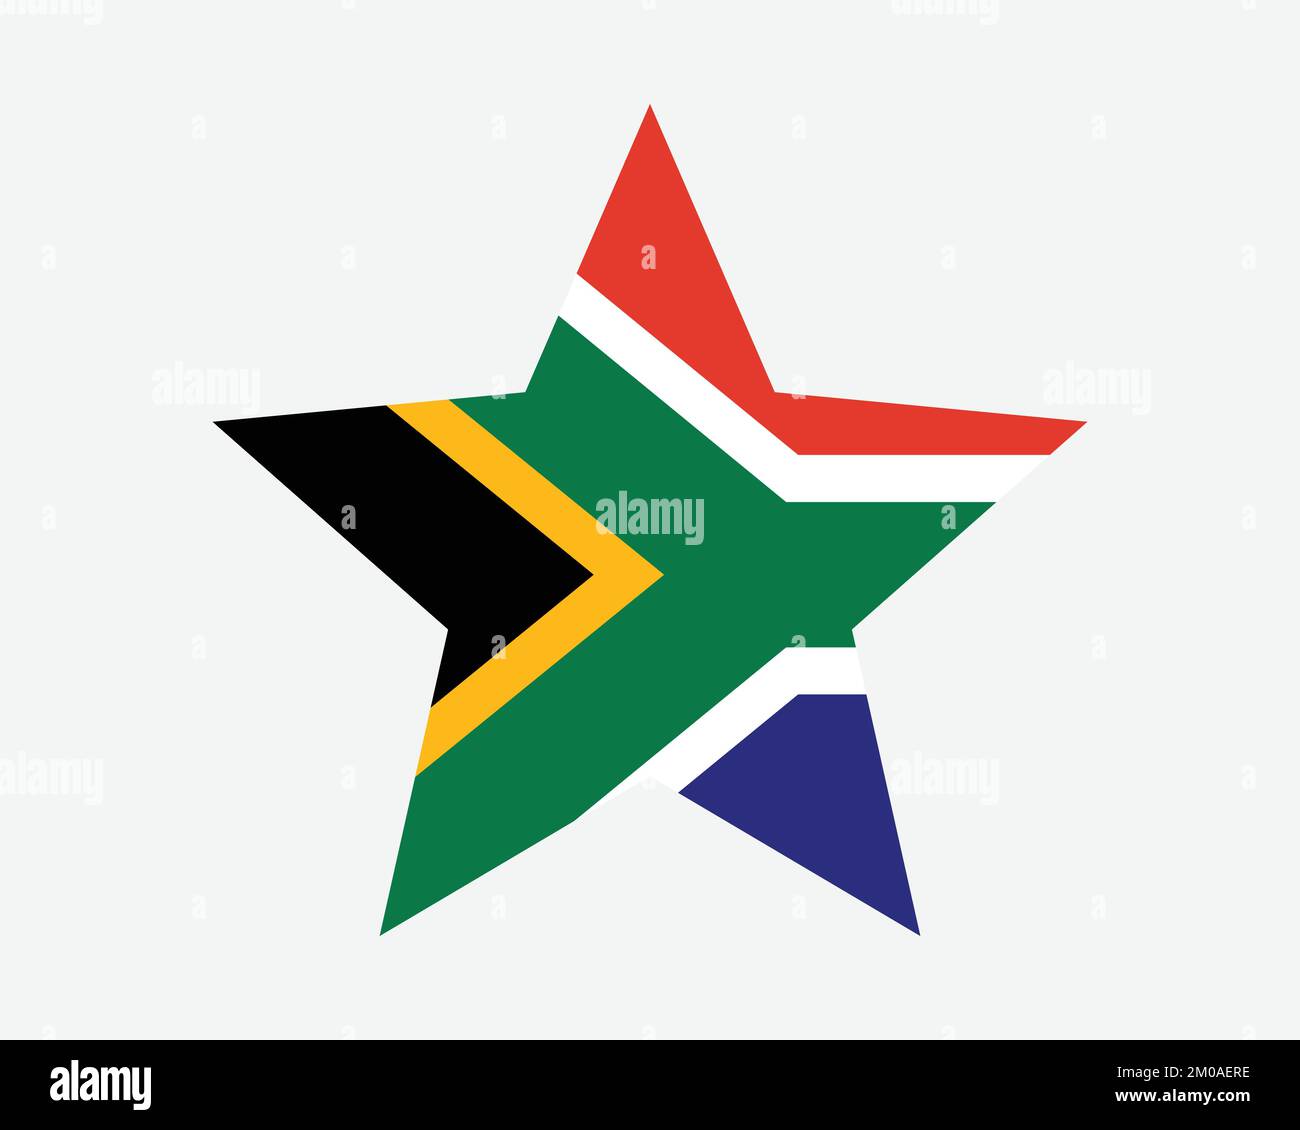 South Africa Star Flag. South African Star Shape Flag. RSA Country National Banner Icon Symbol Vector Flat Artwork Graphic Illustration Stock Vector